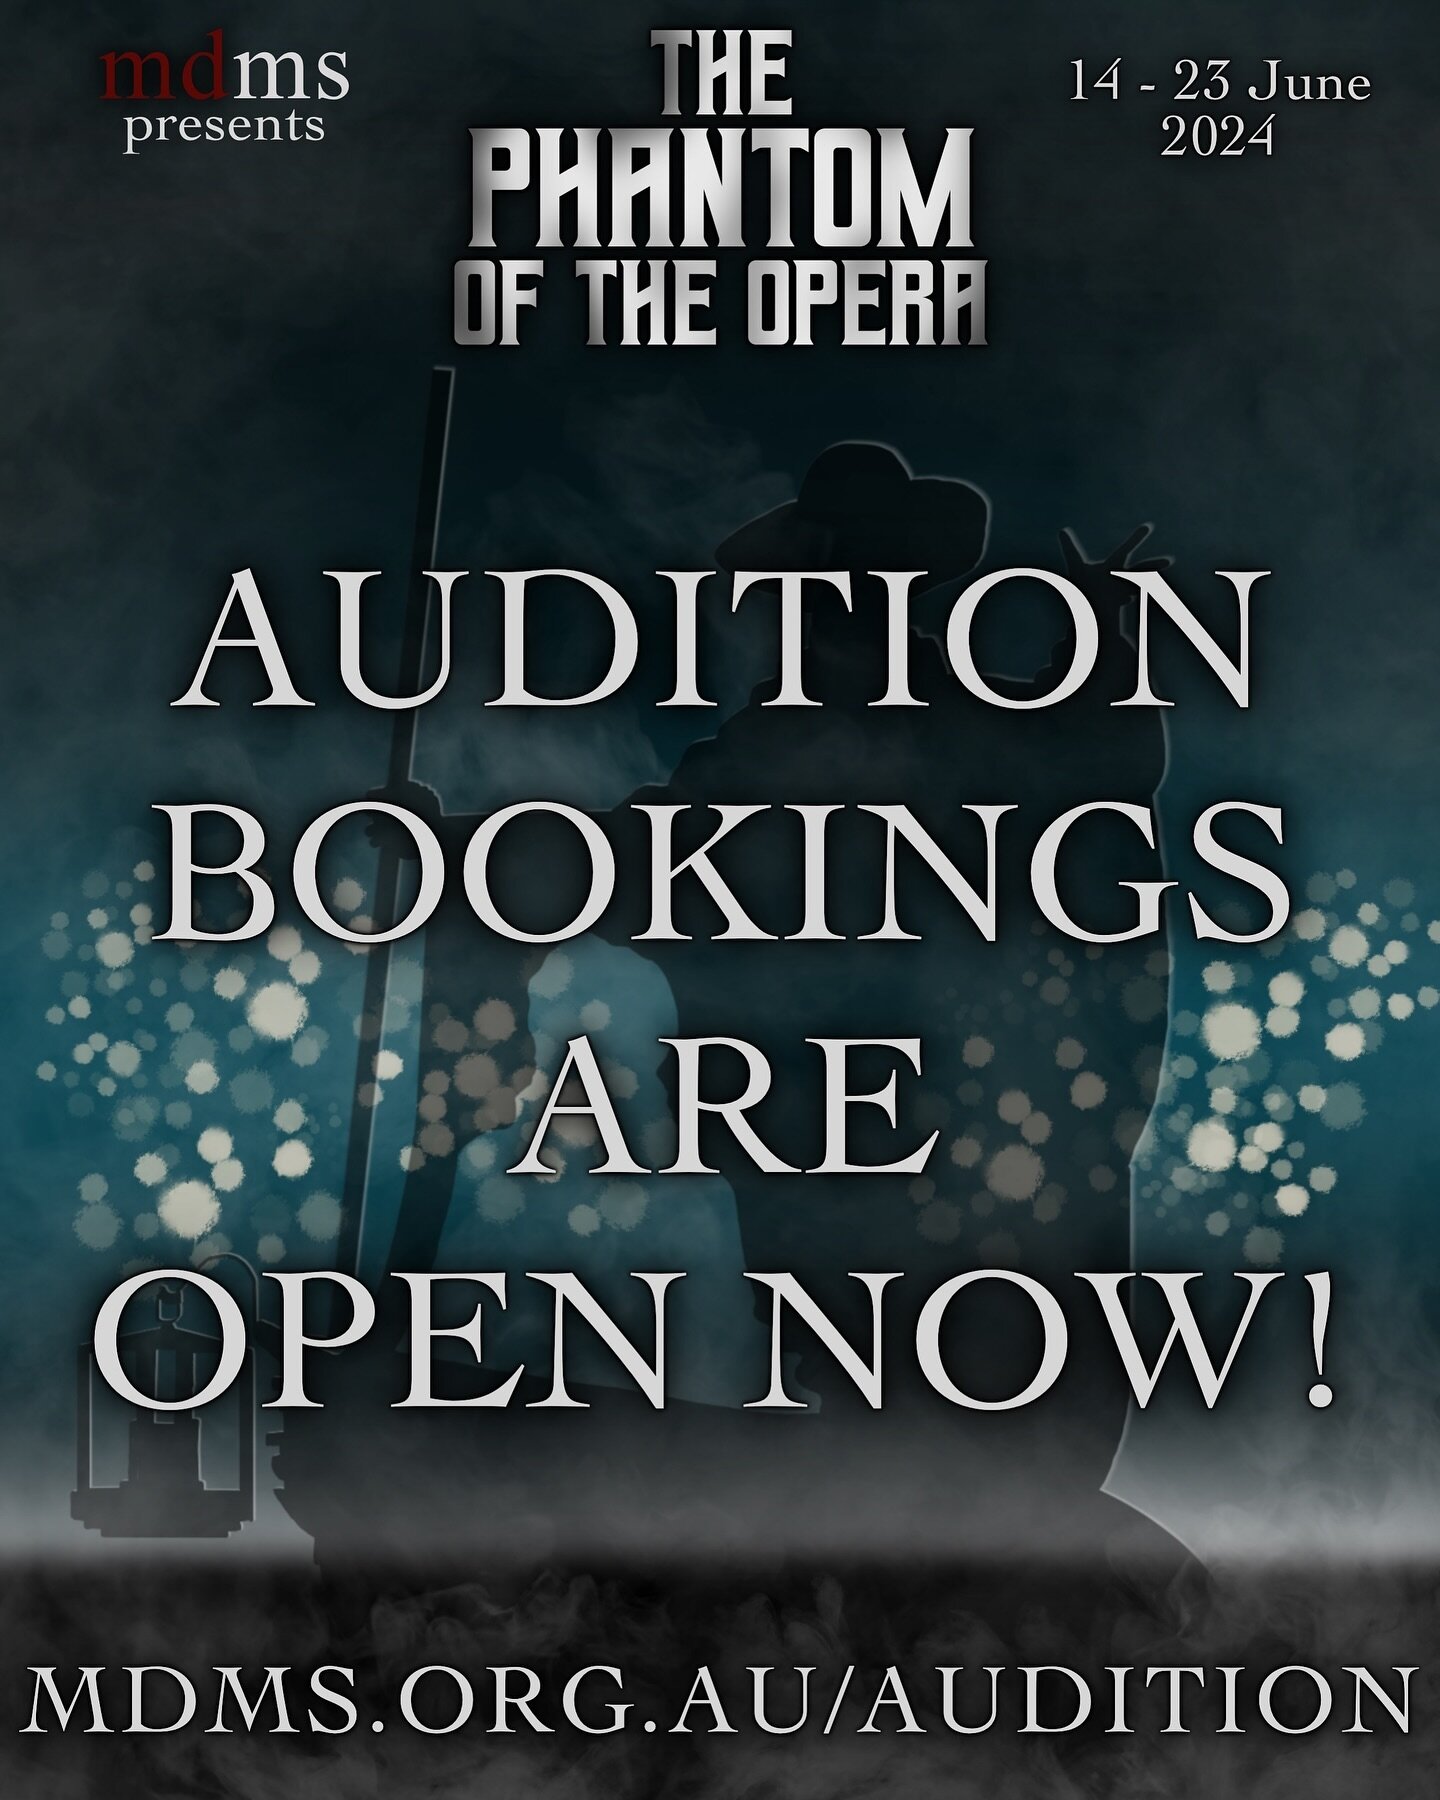 Book your audition for MDMS's 𝙏𝙃𝙀 𝙋𝙃𝘼𝙉𝙏𝙊𝙈 𝙊𝙁 𝙏𝙃𝙀 𝙊𝙋𝙀𝙍𝘼 now!
visit 𝙢𝙙𝙢𝙨.𝙤𝙧𝙜.𝙖𝙪/𝙖𝙪𝙙𝙞𝙩𝙞𝙤𝙣 to snag your spot 🏃
#mdmsphantom